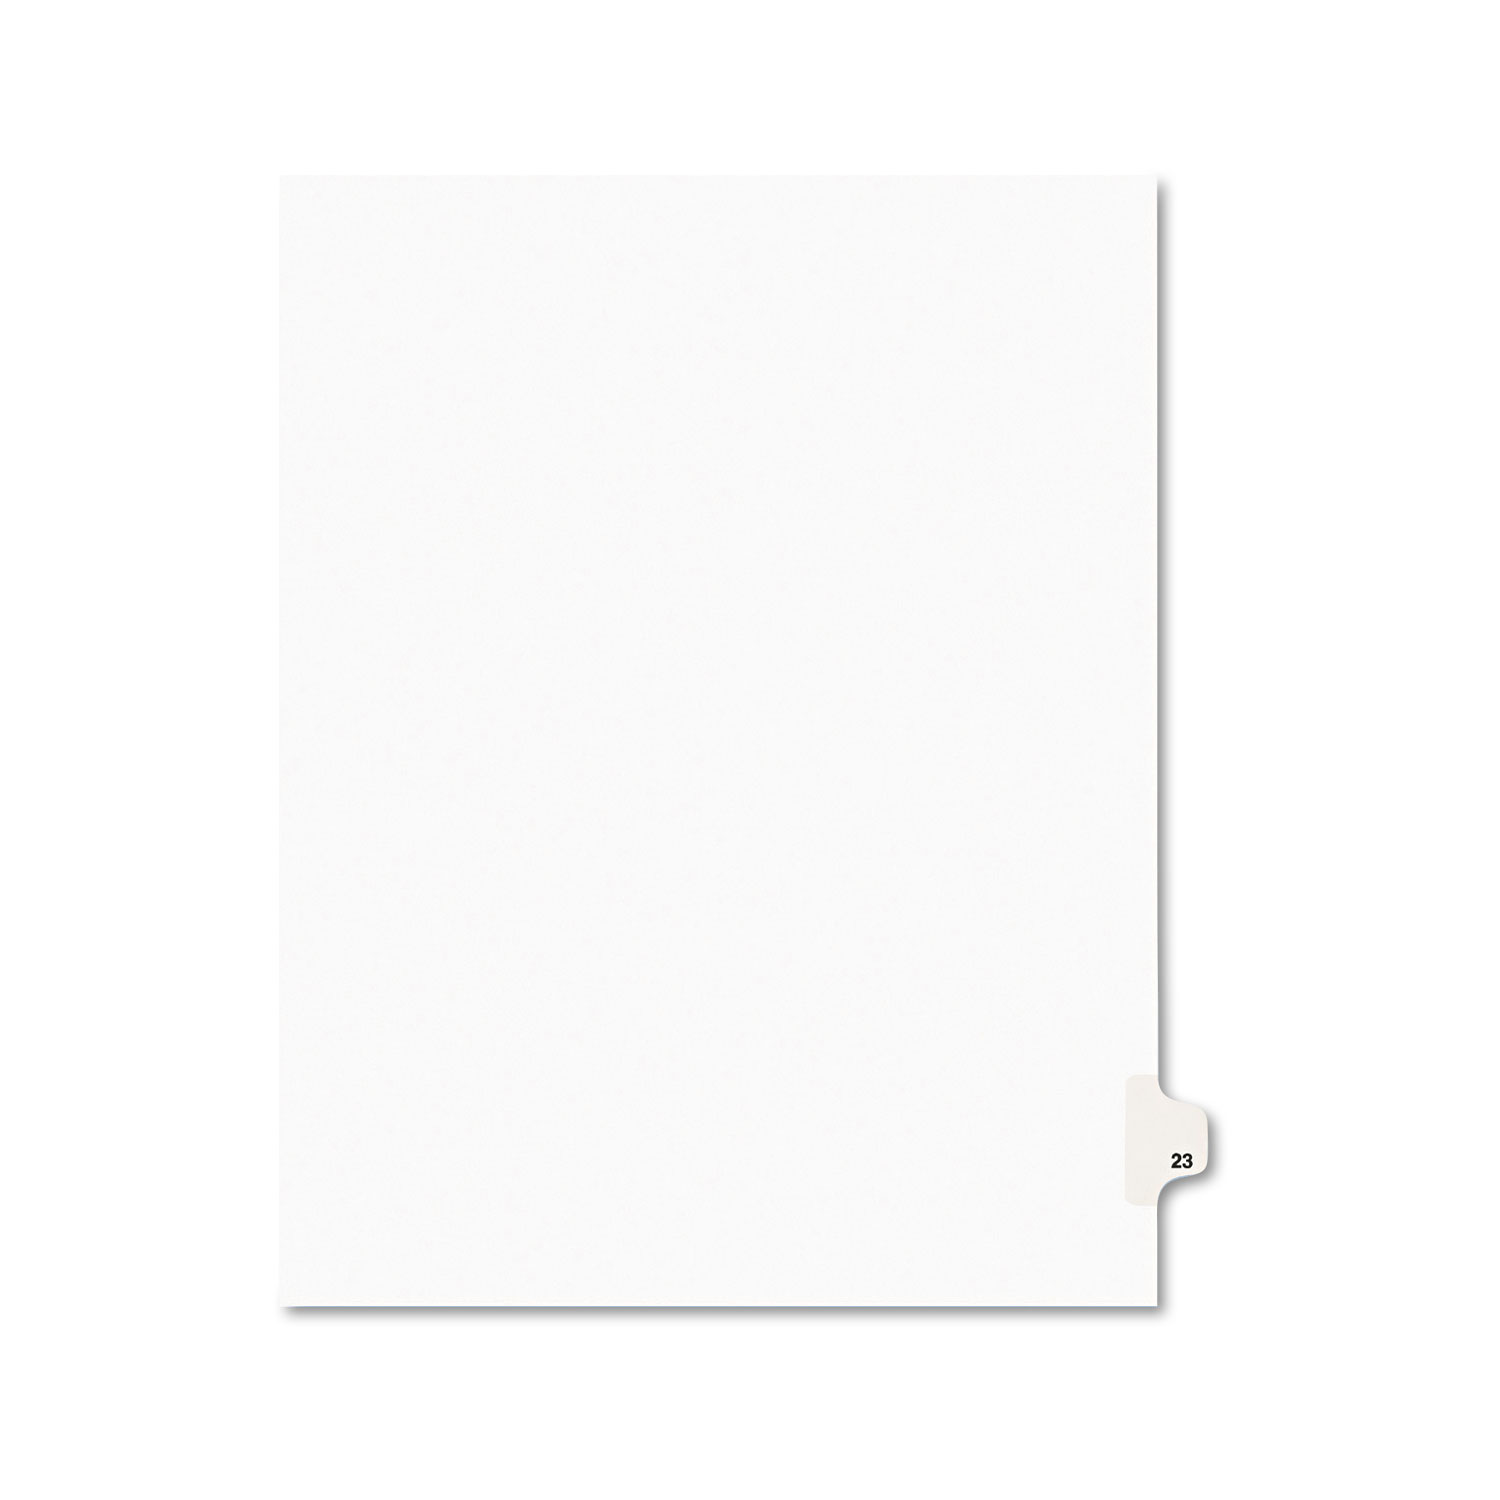  Avery 01023 Preprinted Legal Exhibit Side Tab Index Dividers, Avery Style, 10-Tab, 23, 11 x 8.5, White, 25/Pack (AVE01023) 